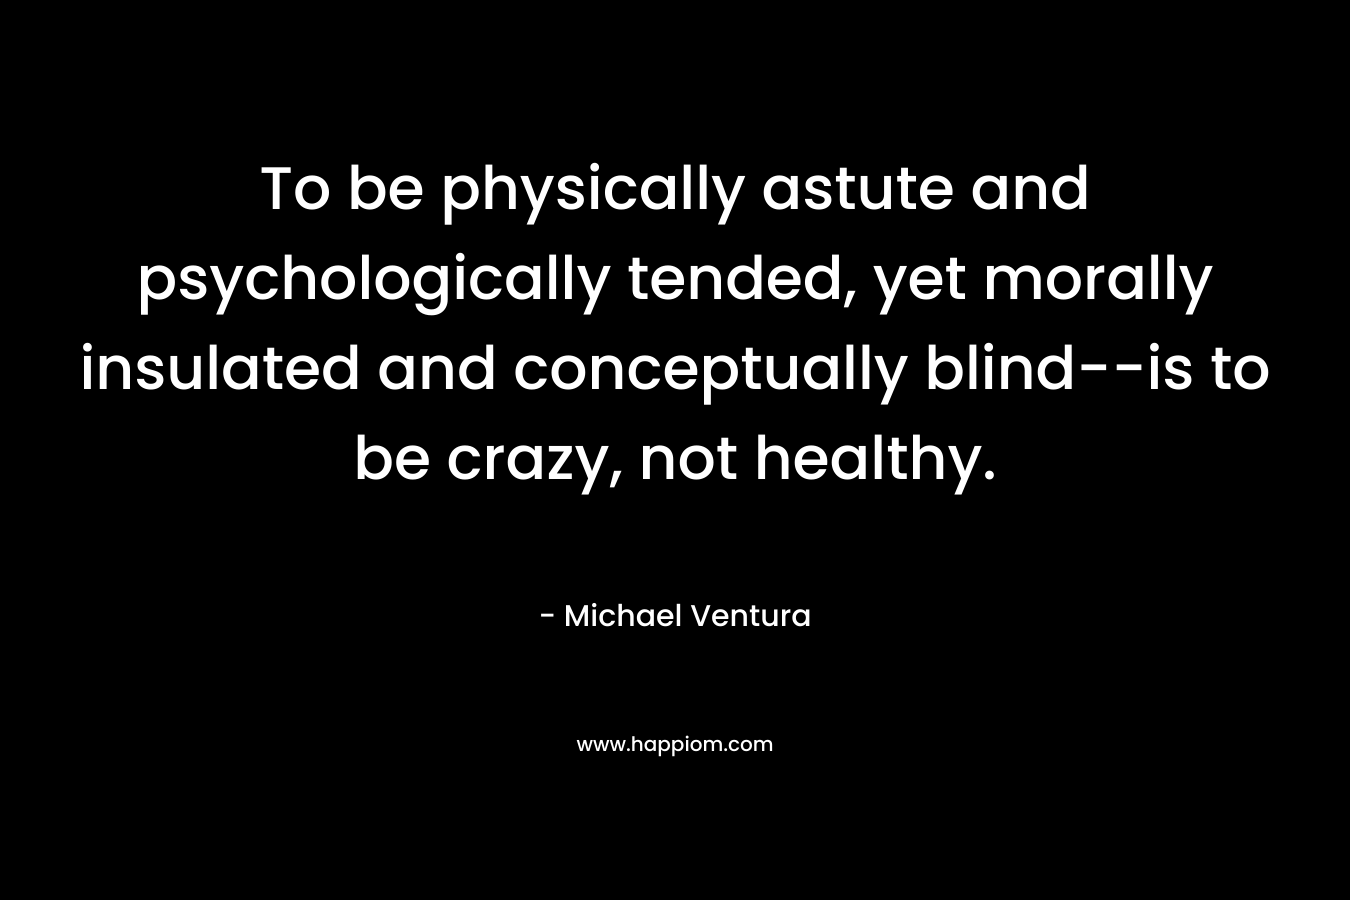 To be physically astute and psychologically tended, yet morally insulated and conceptually blind–is to be crazy, not healthy. – Michael Ventura